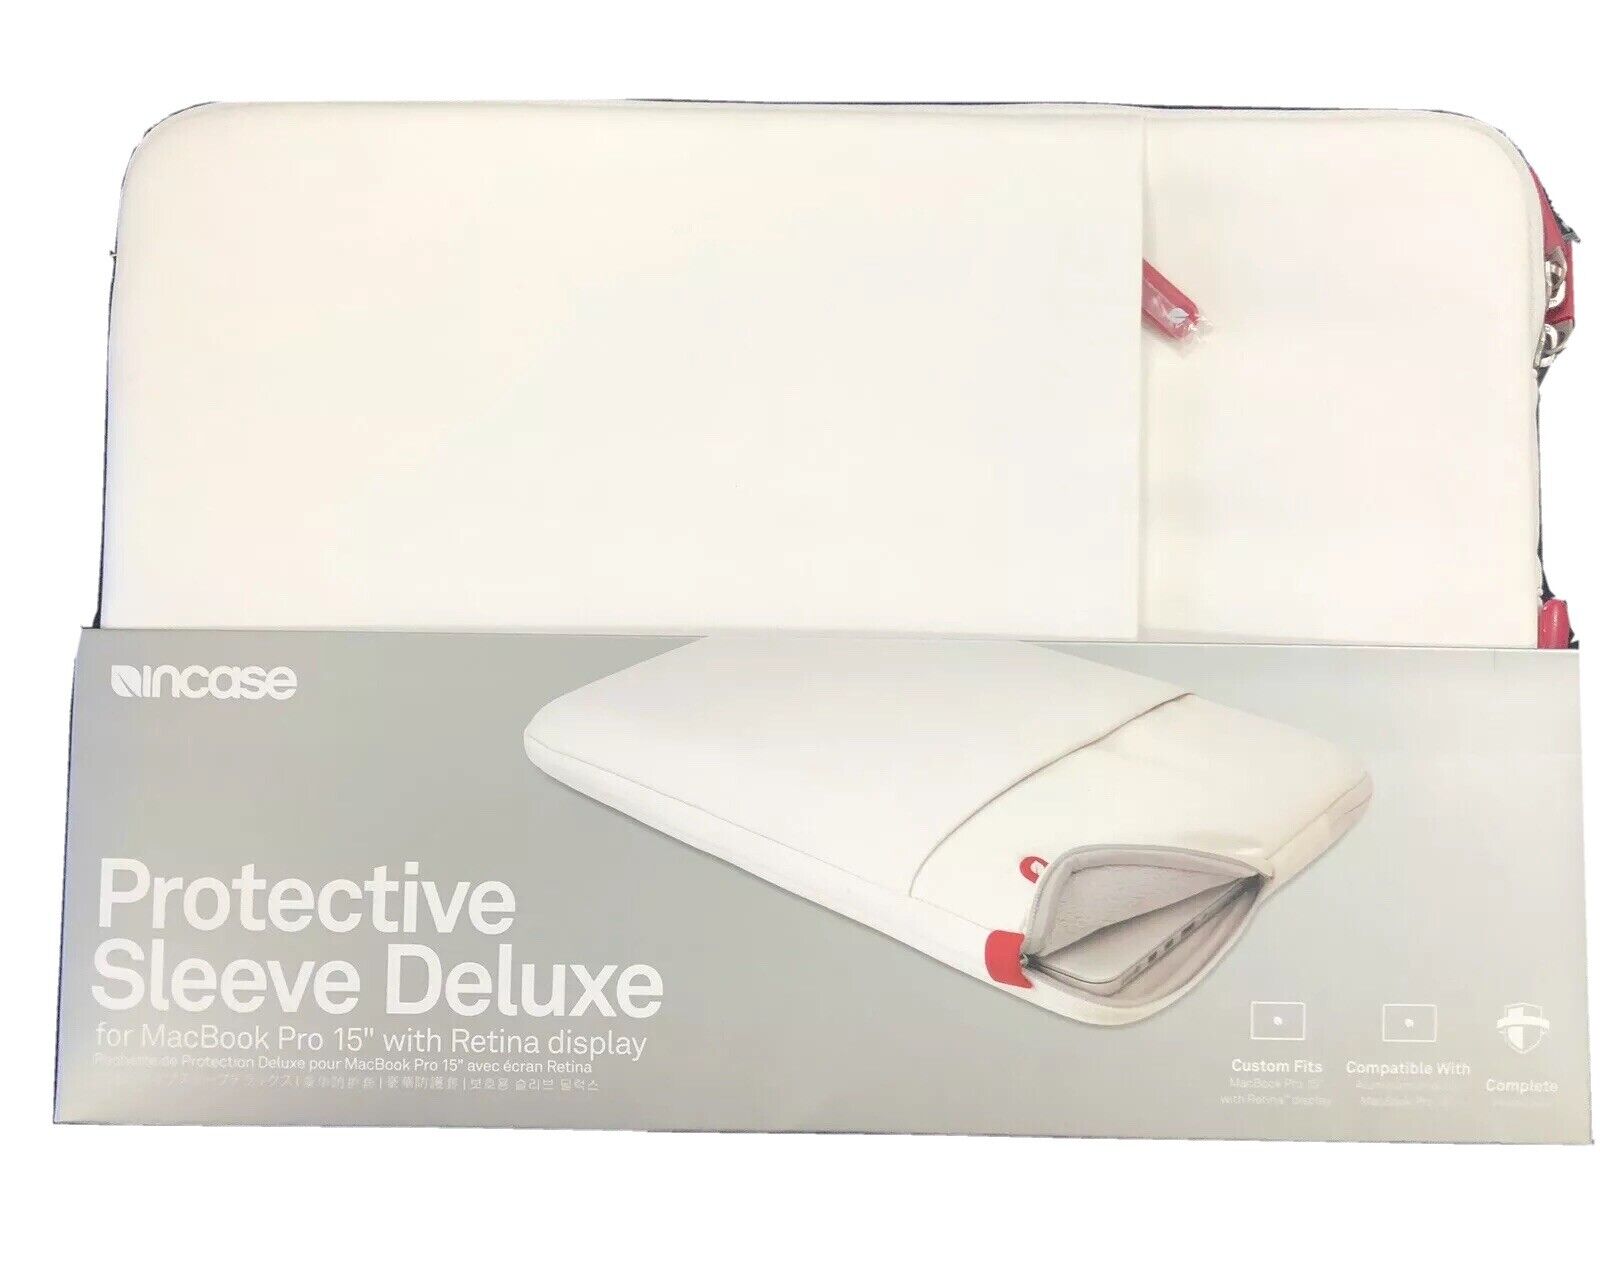 Incase Protective Sleeve Deluxe Pouch Case for MacBook Pro 15” White